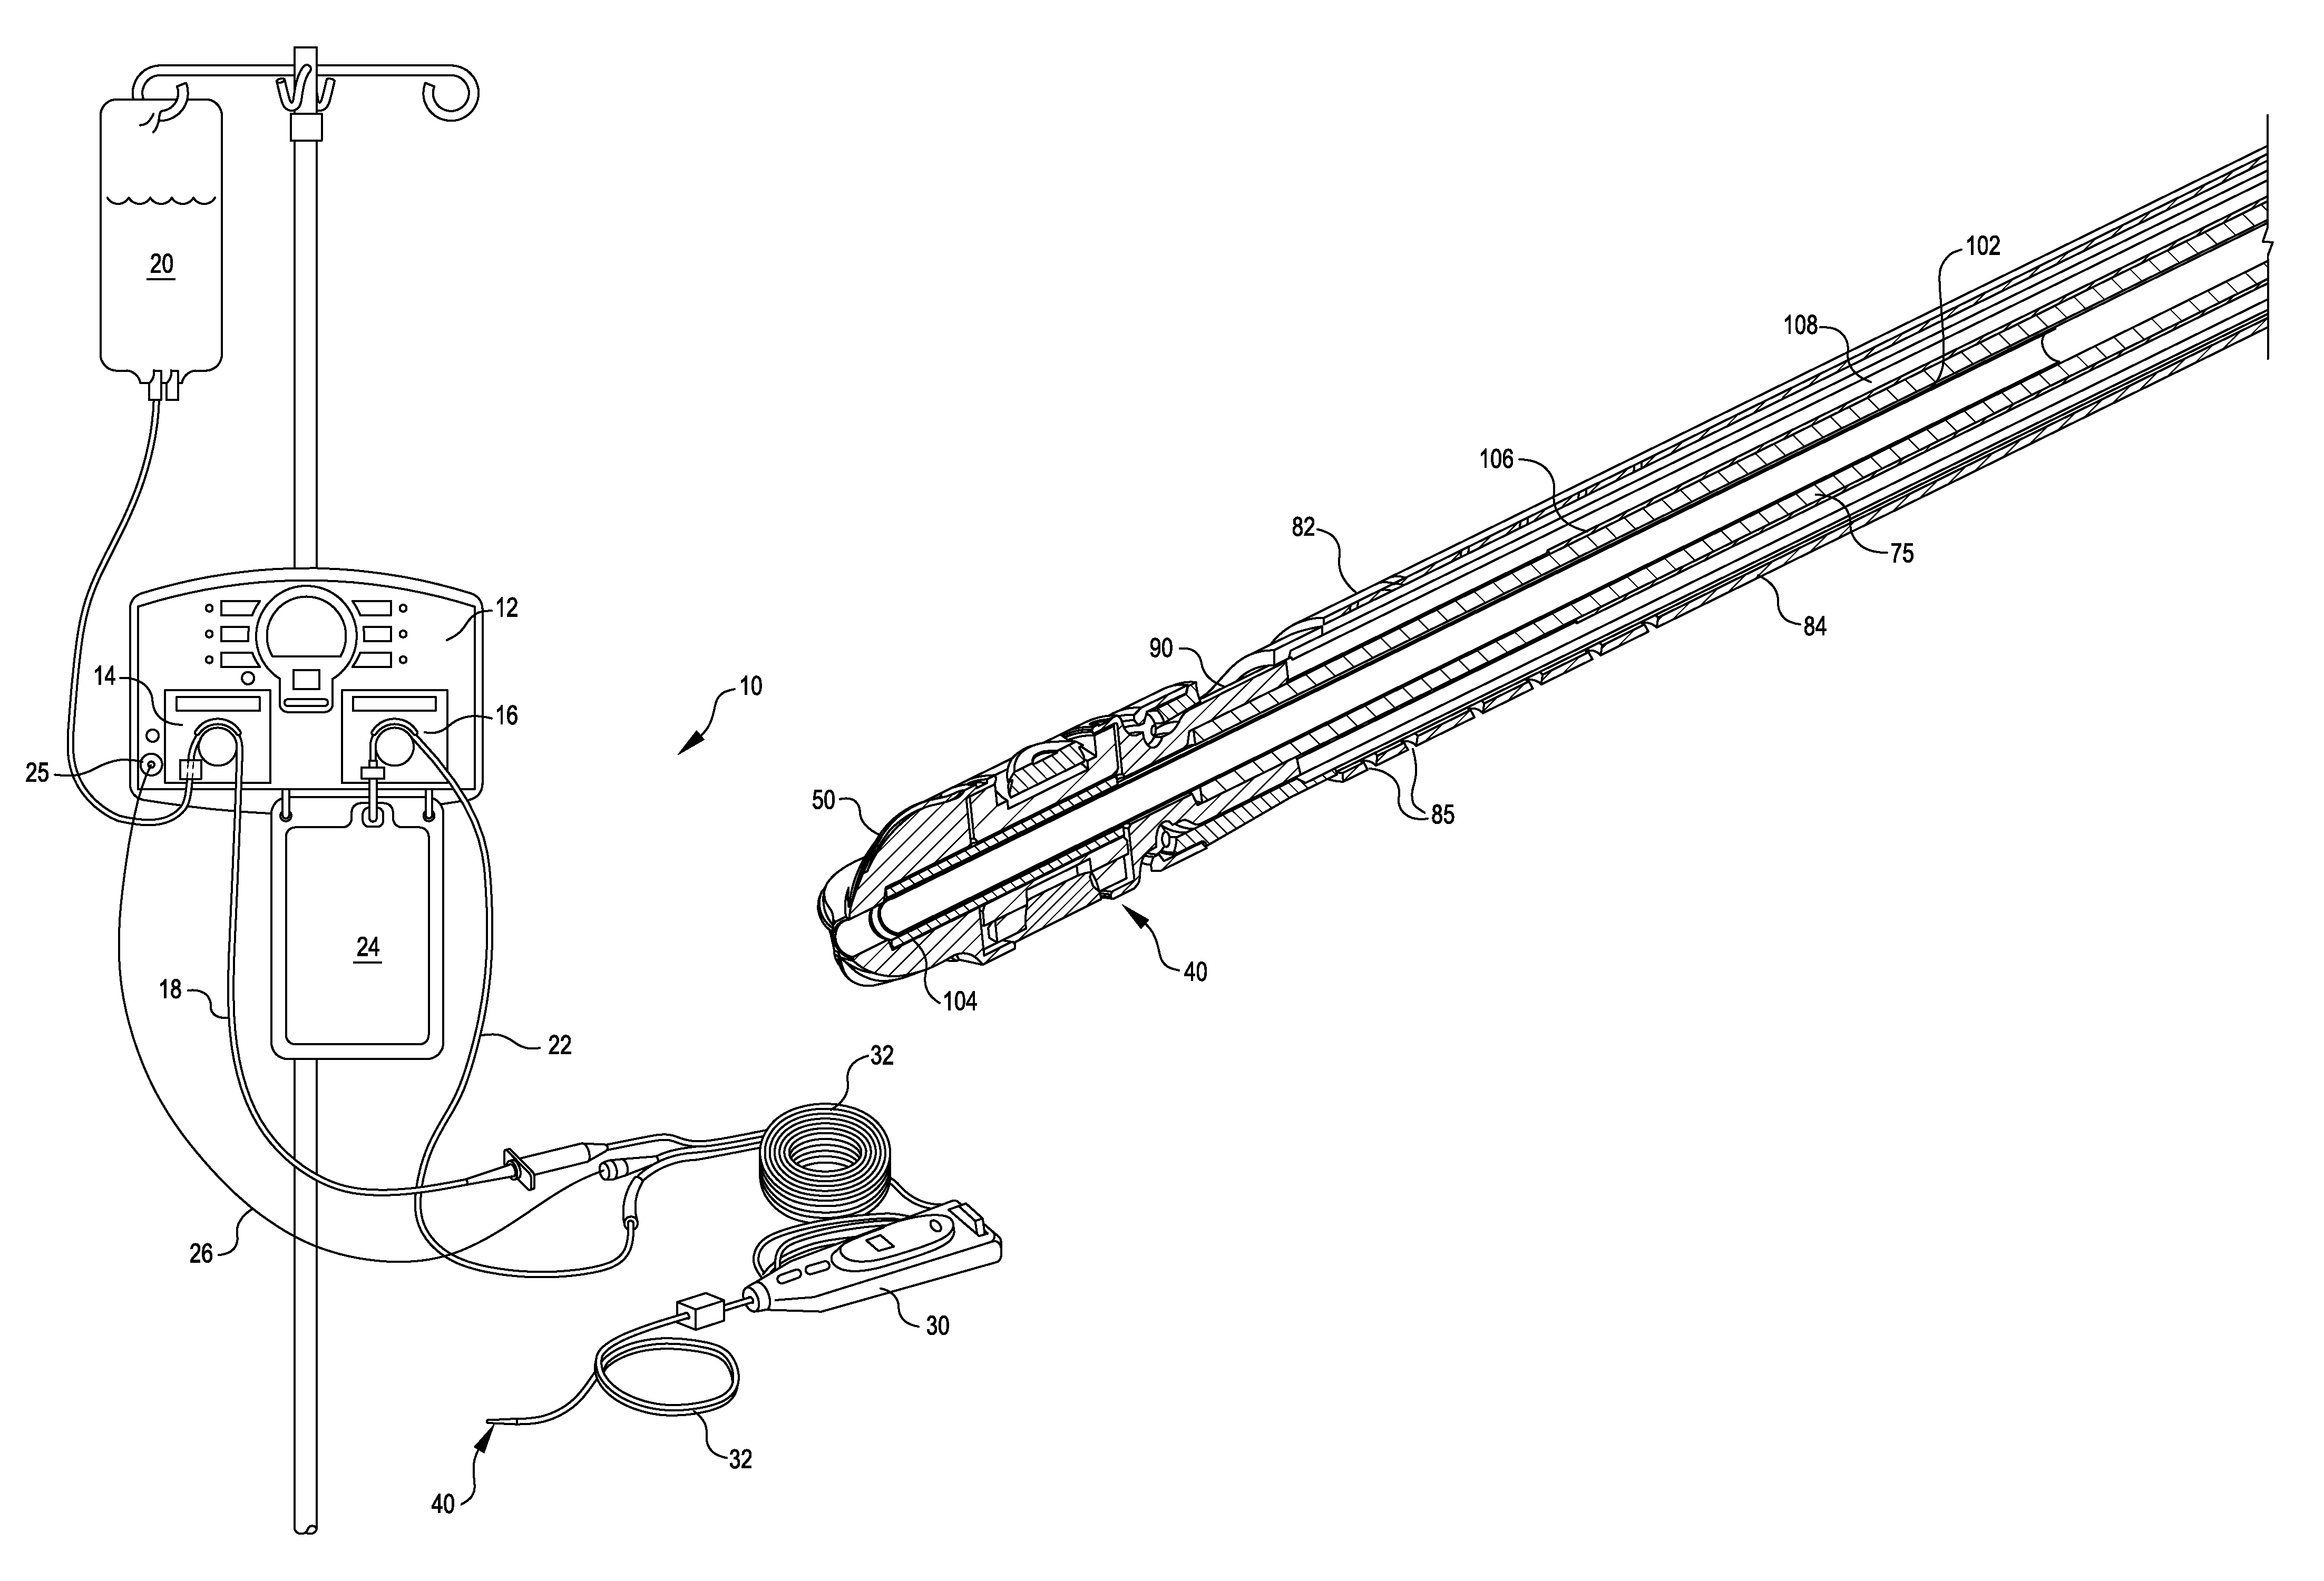 Interventional catheters incorporating an active aspiration system